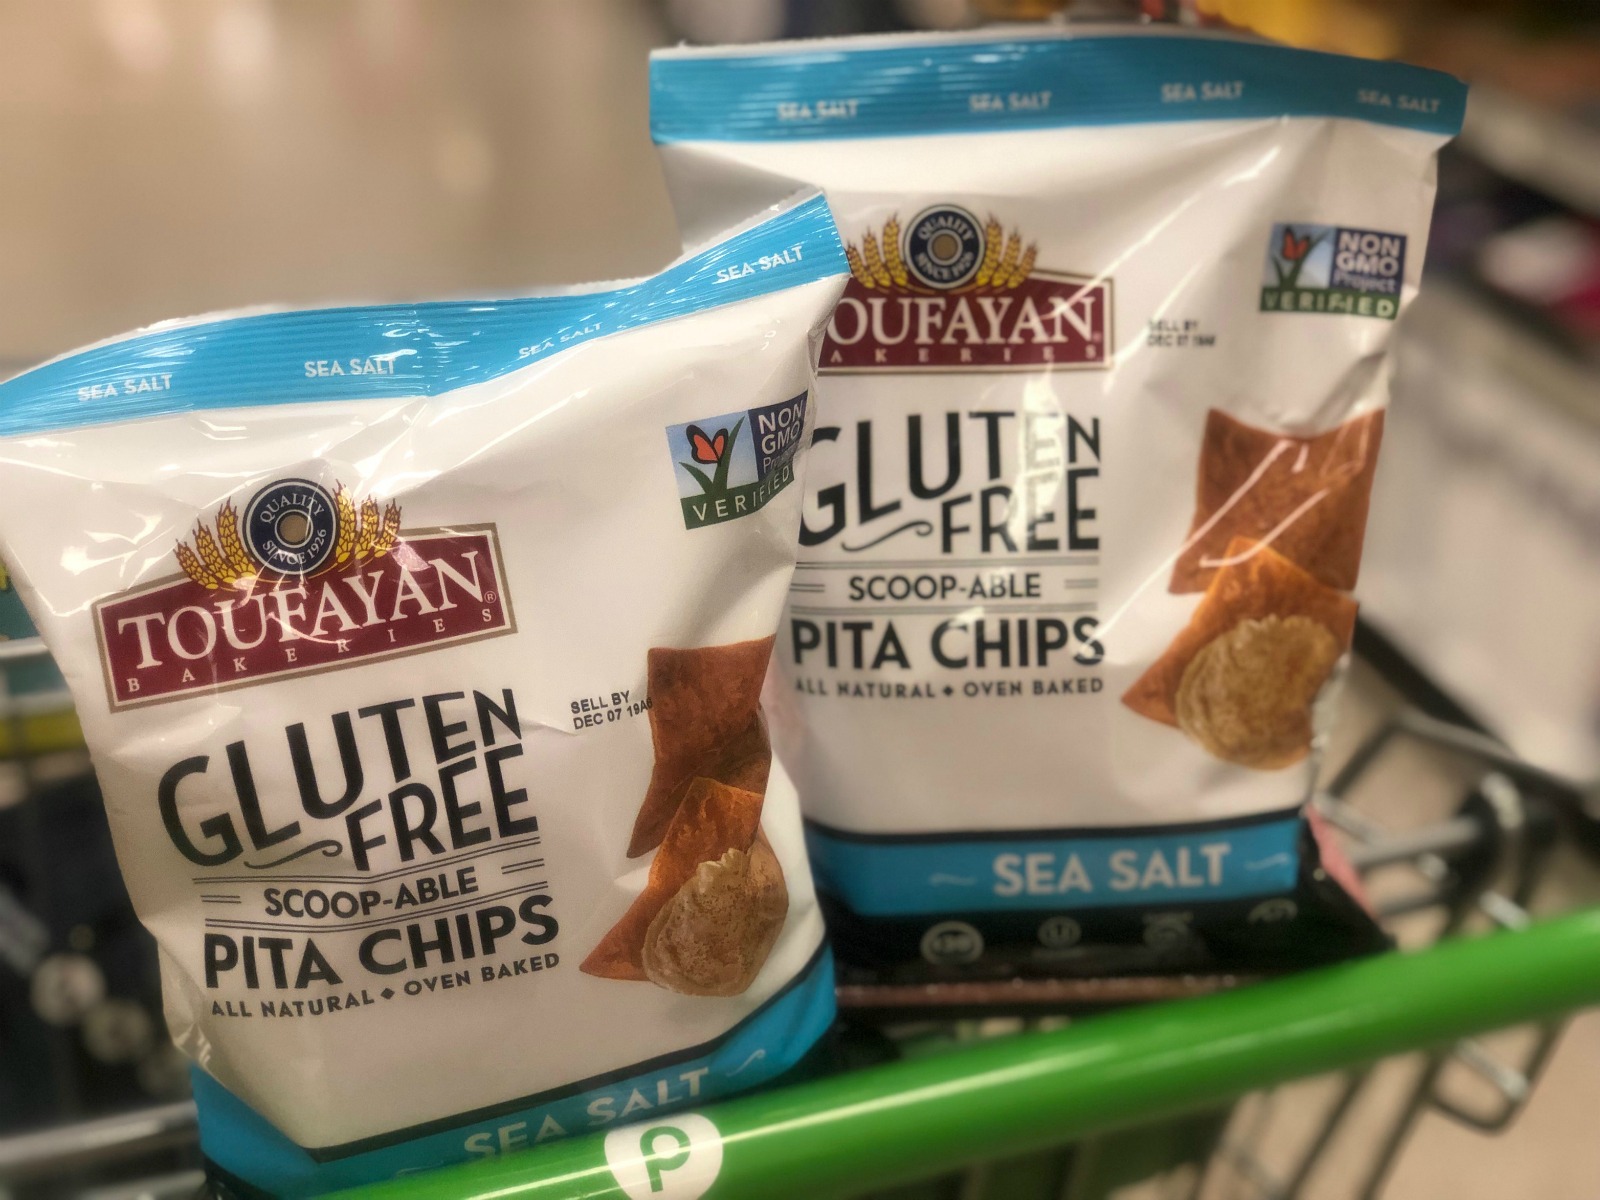 Toufayan Gluten-Free Scoop-Able Pita Chips Are Buy One, Get One FREE At Publix